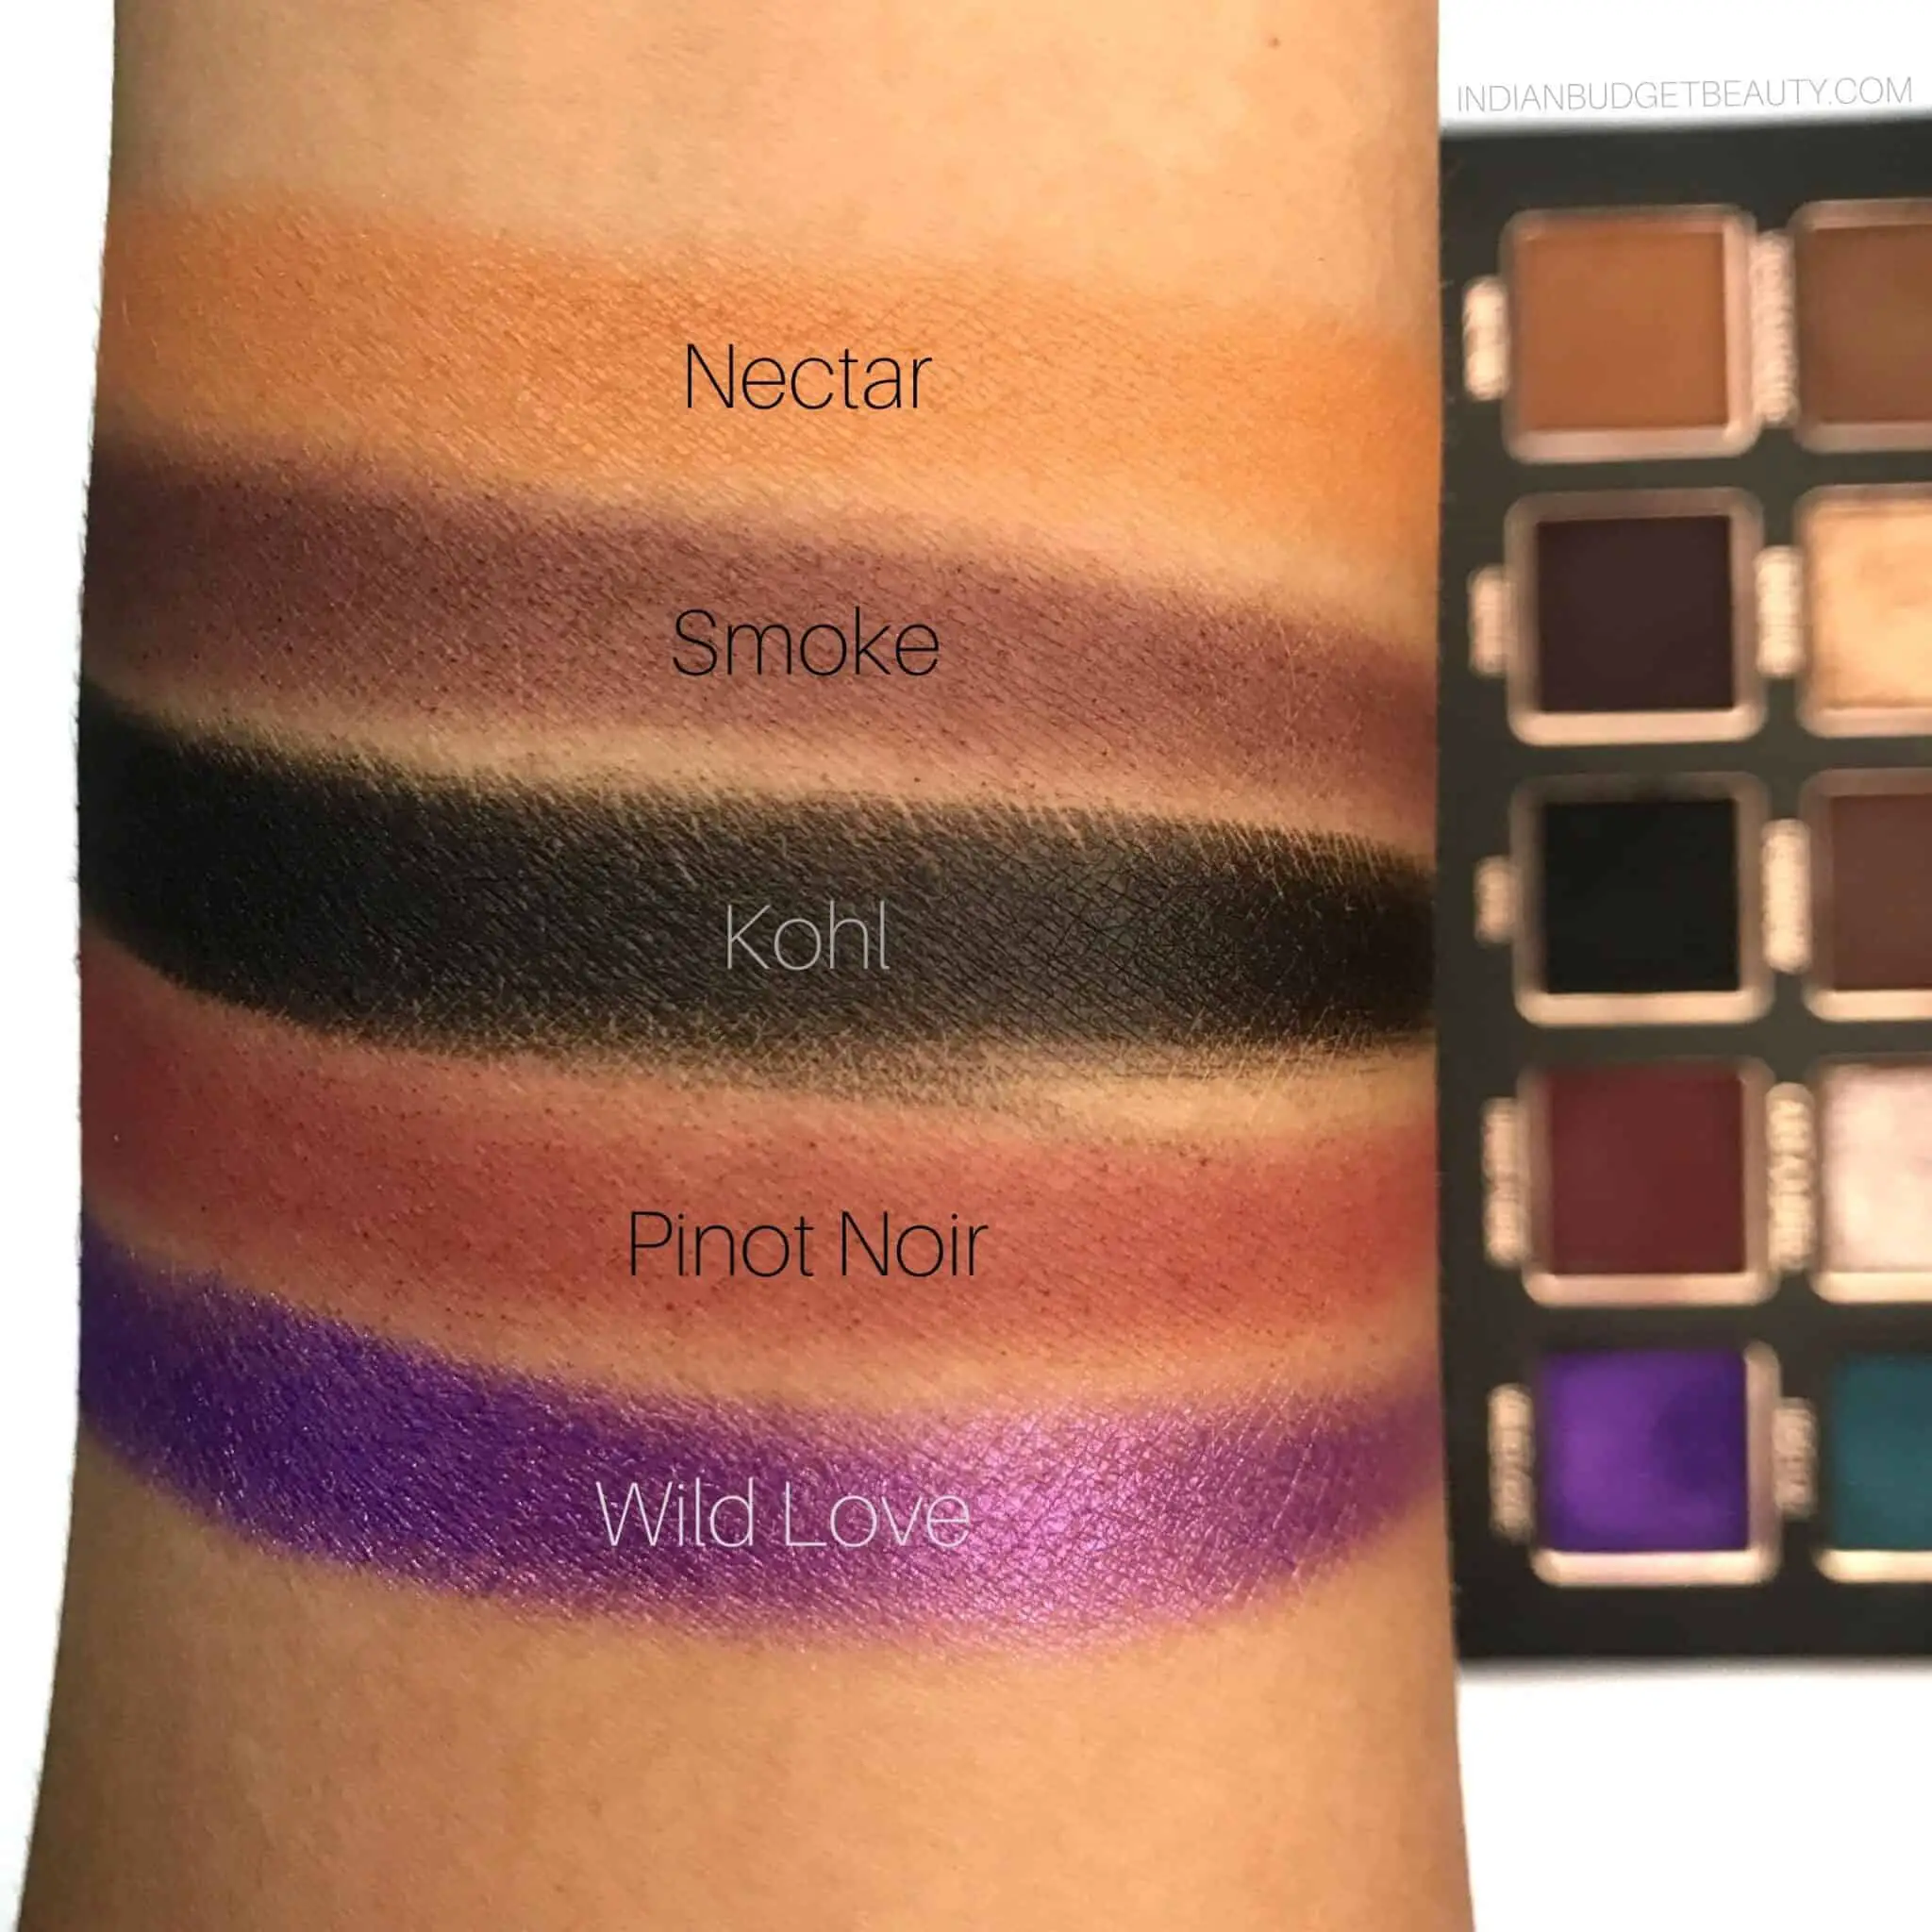 Tann Beauty This Is All I Need Eyeshadow Palette Swatches